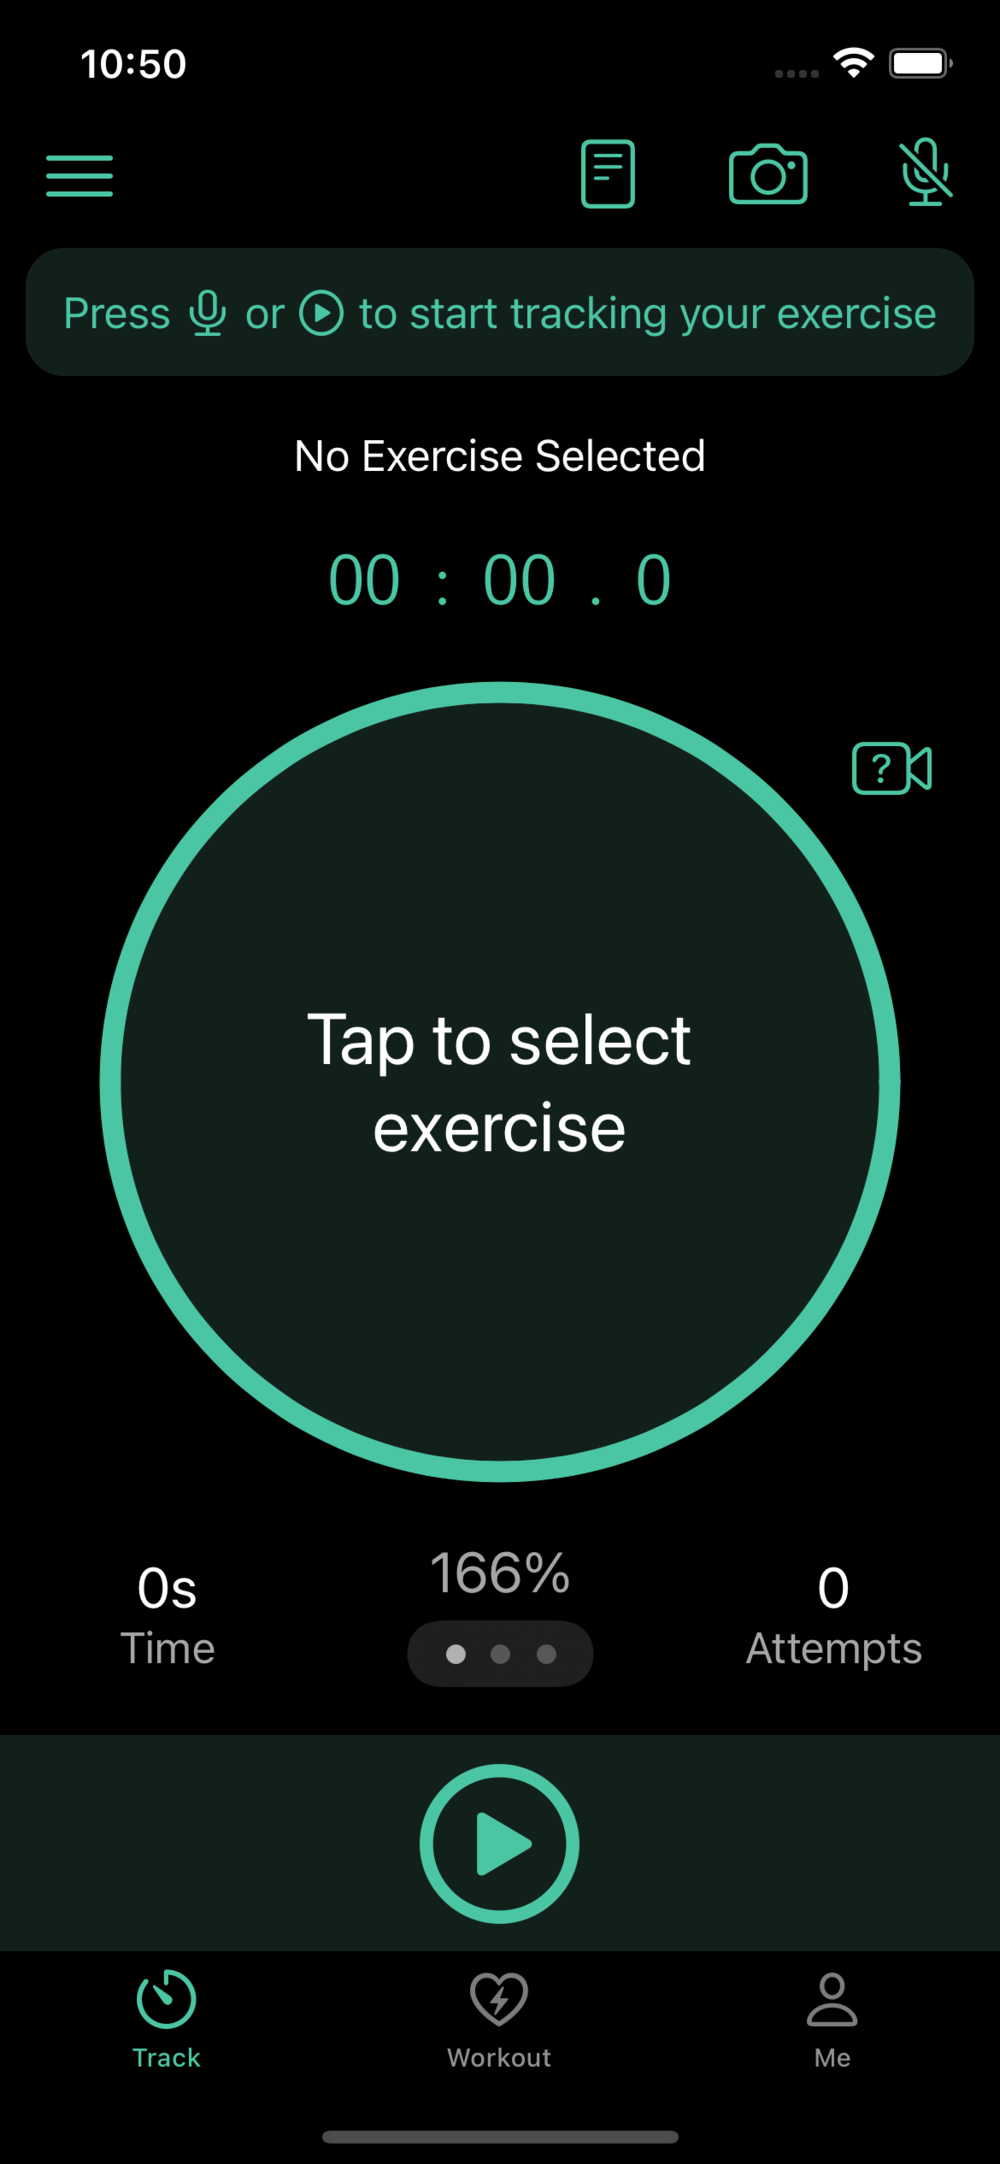 Tracking Screen - No exercise Selected